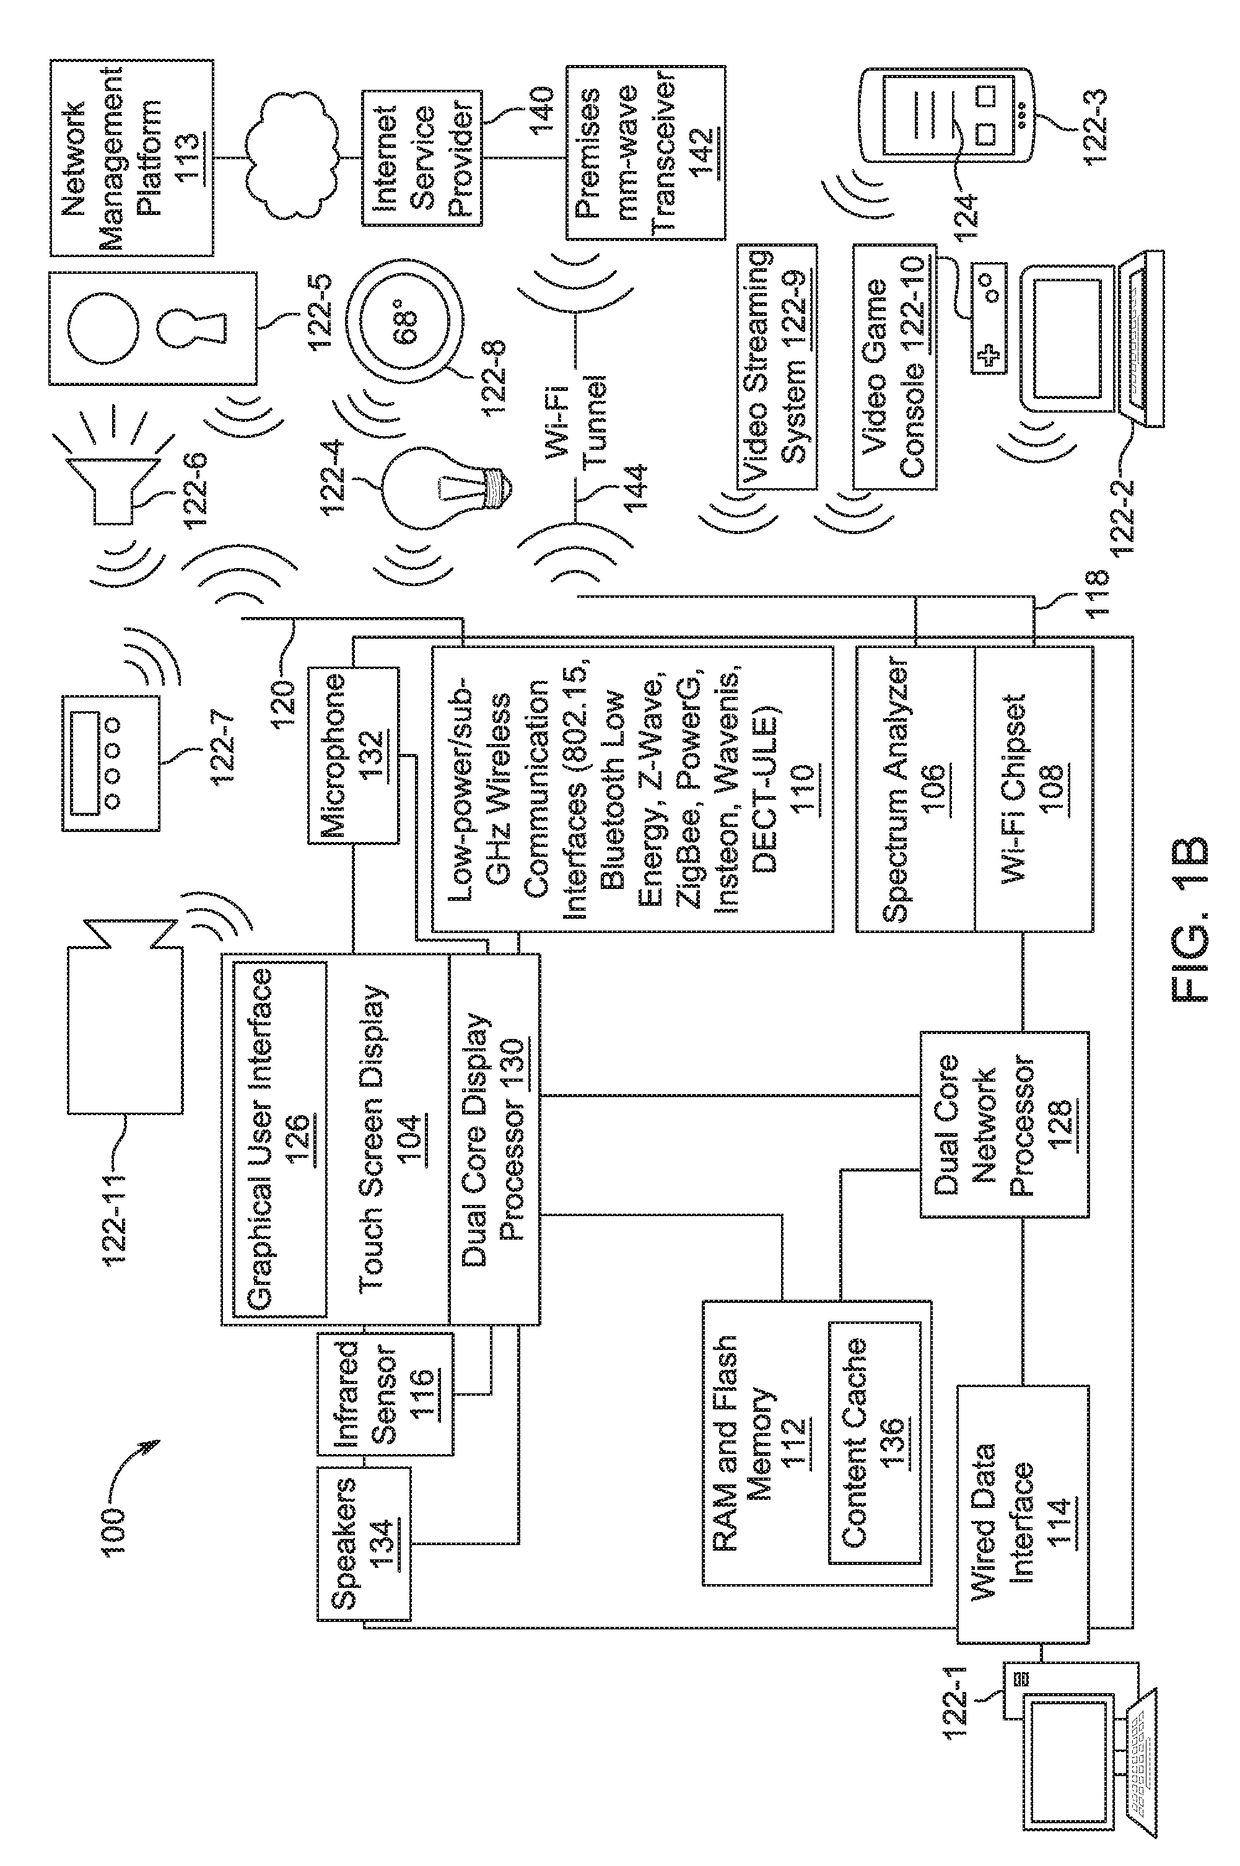 Application Programming Interface for Premises Networking Device